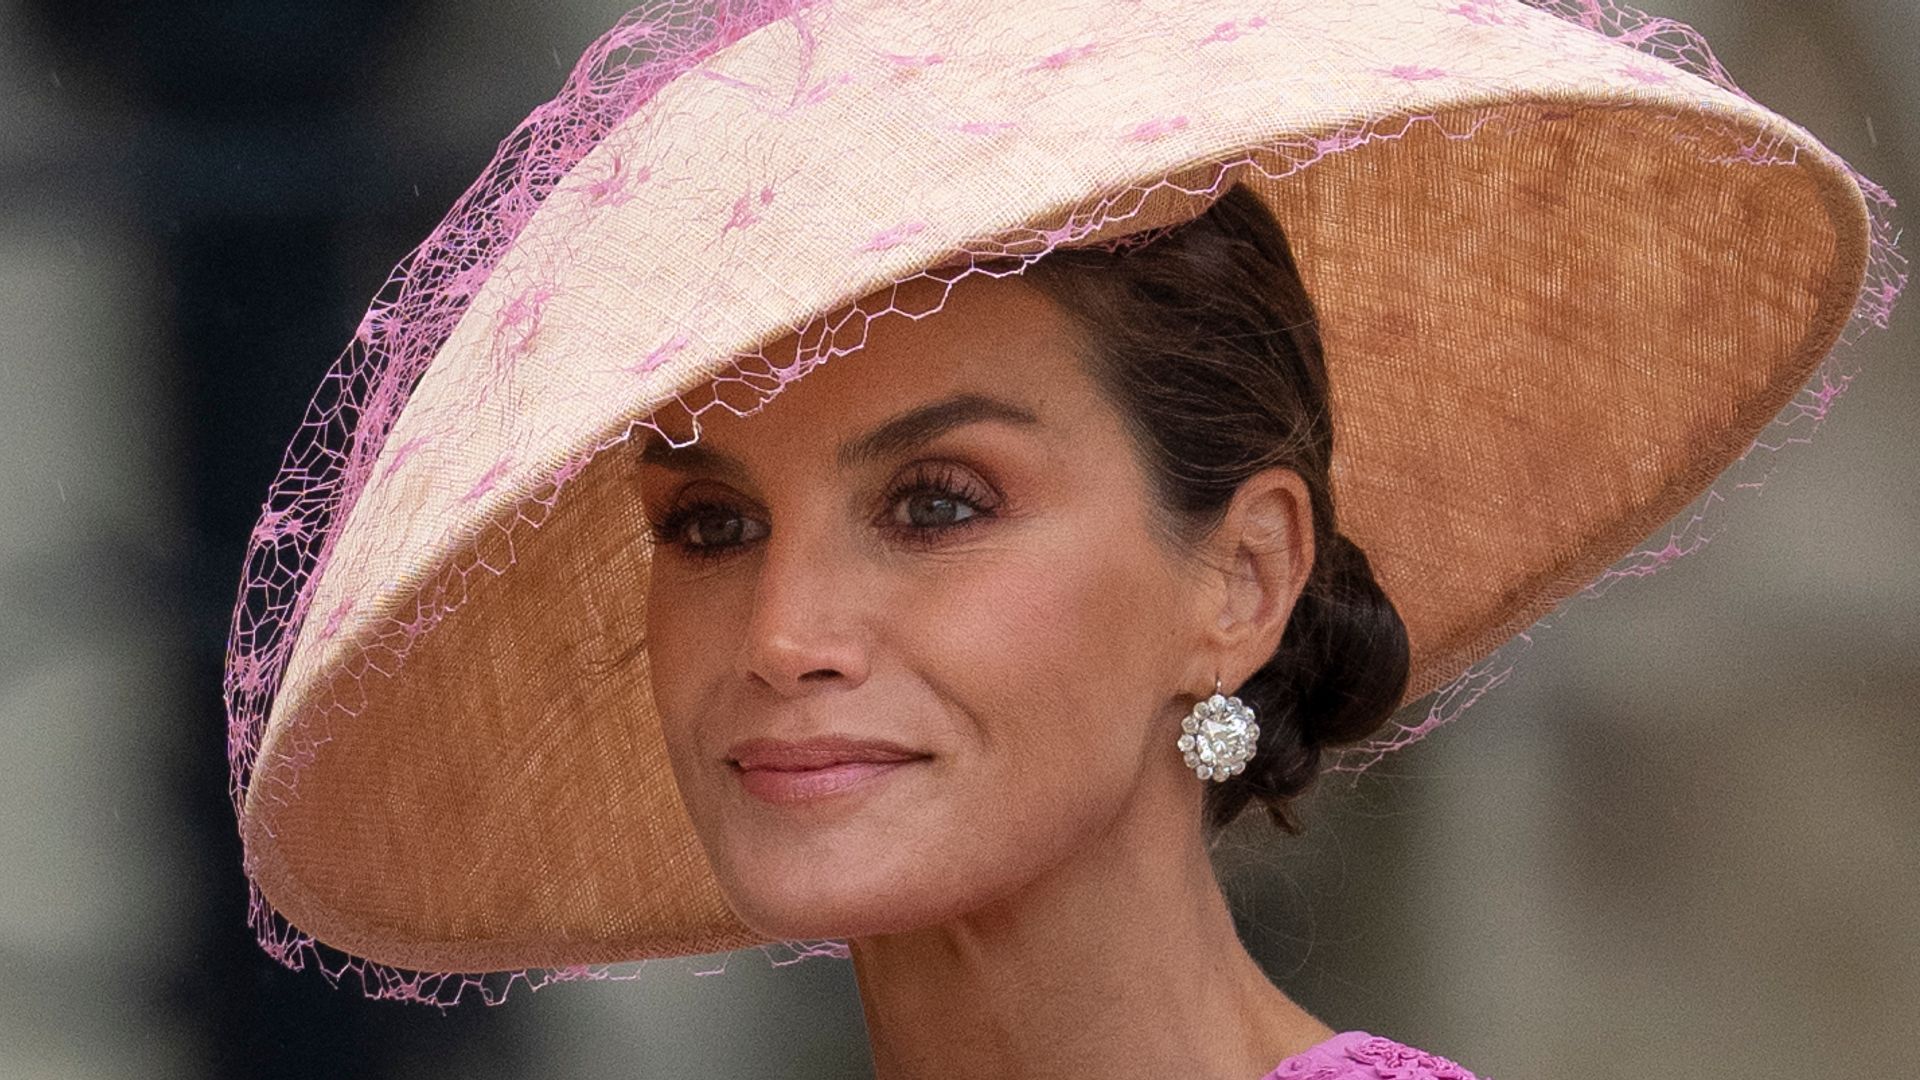 Queen Letizia of Spain in pink outfit and hat